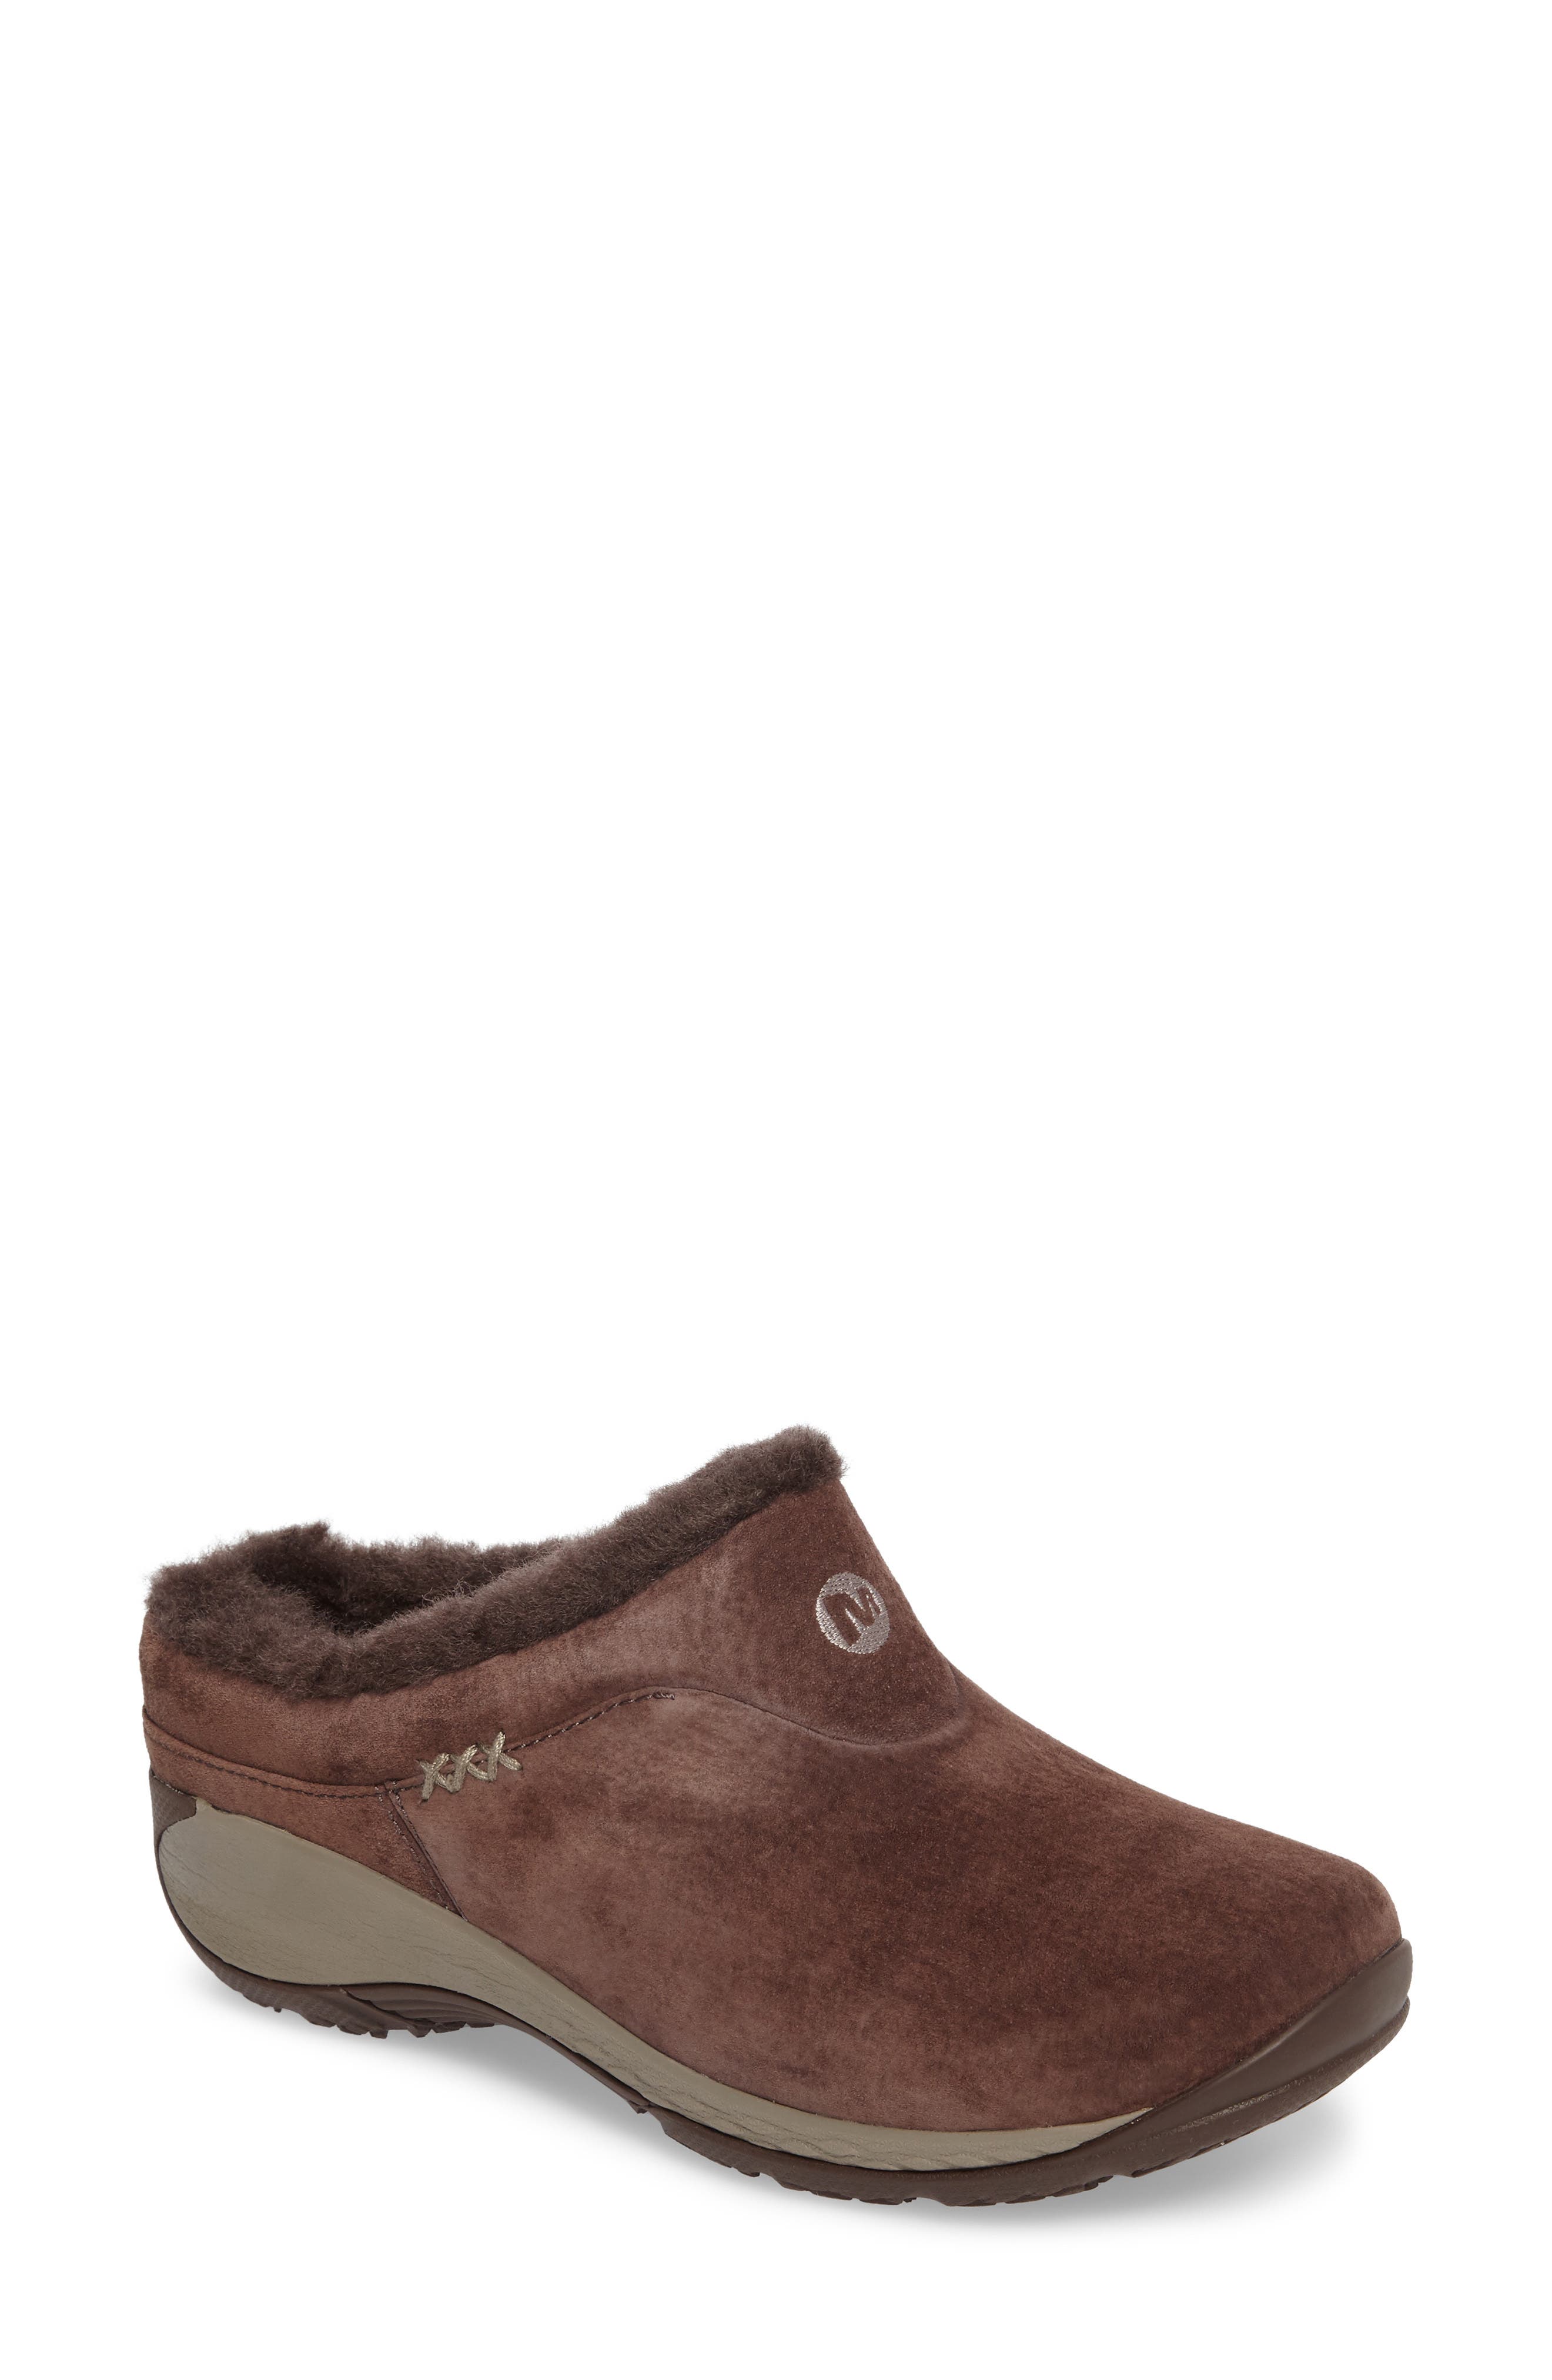 genuine leather merrell clogs womens